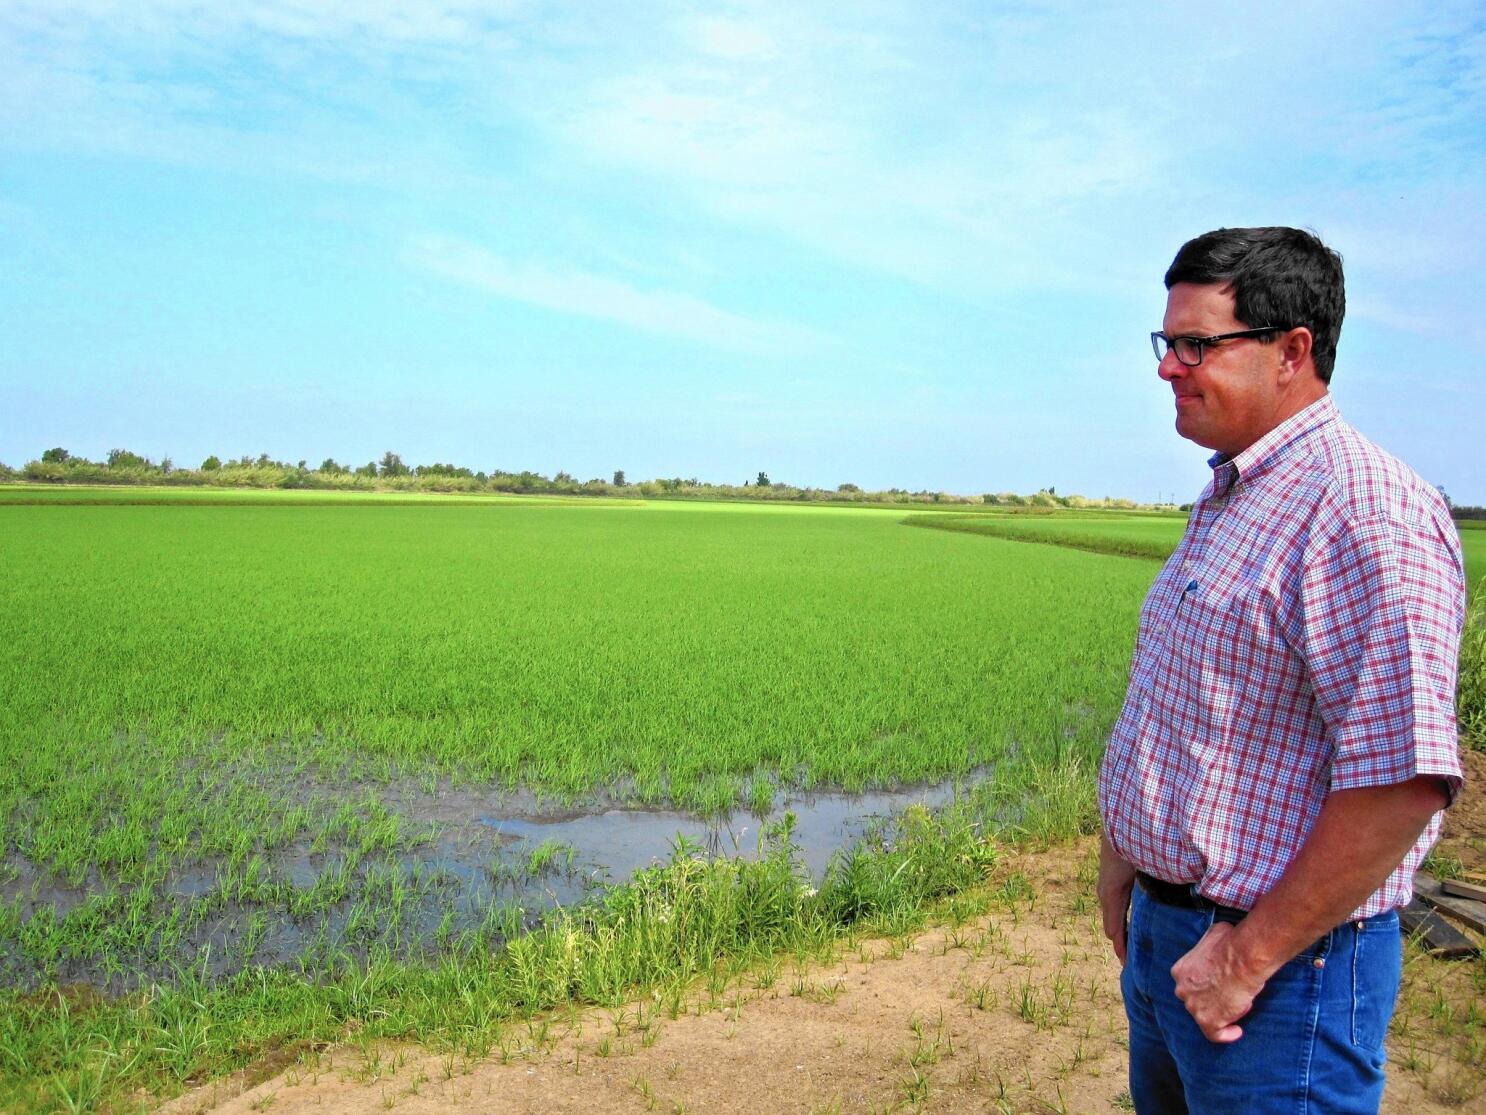 Trade Market Landscape for California Rice Remains Turbulent